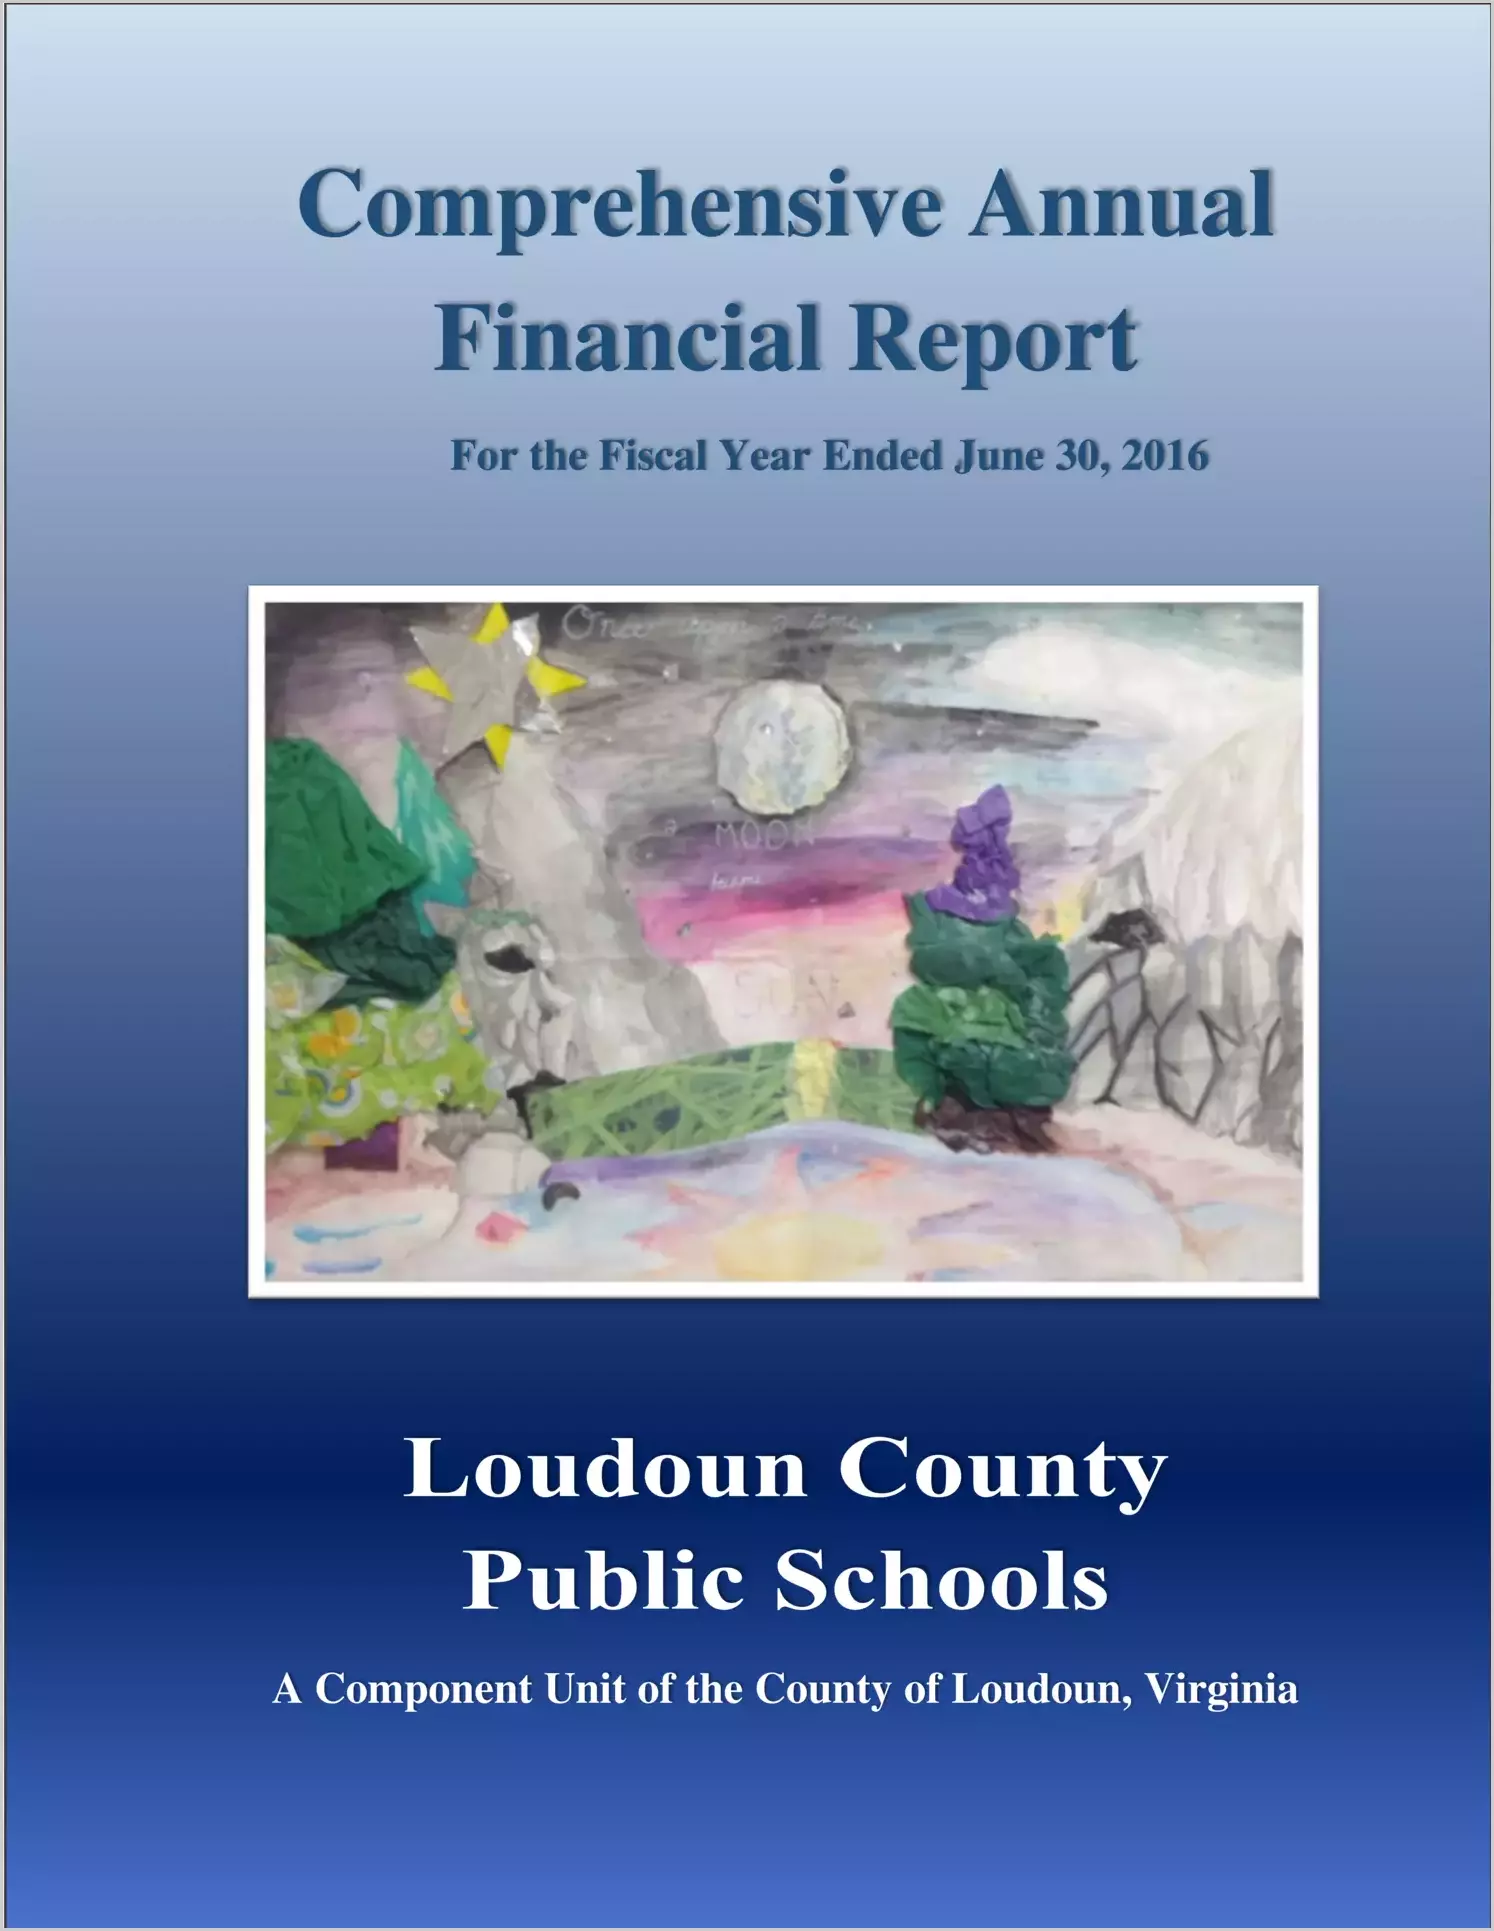 2016 Public Schools Annual Financial Report for County of Loudoun